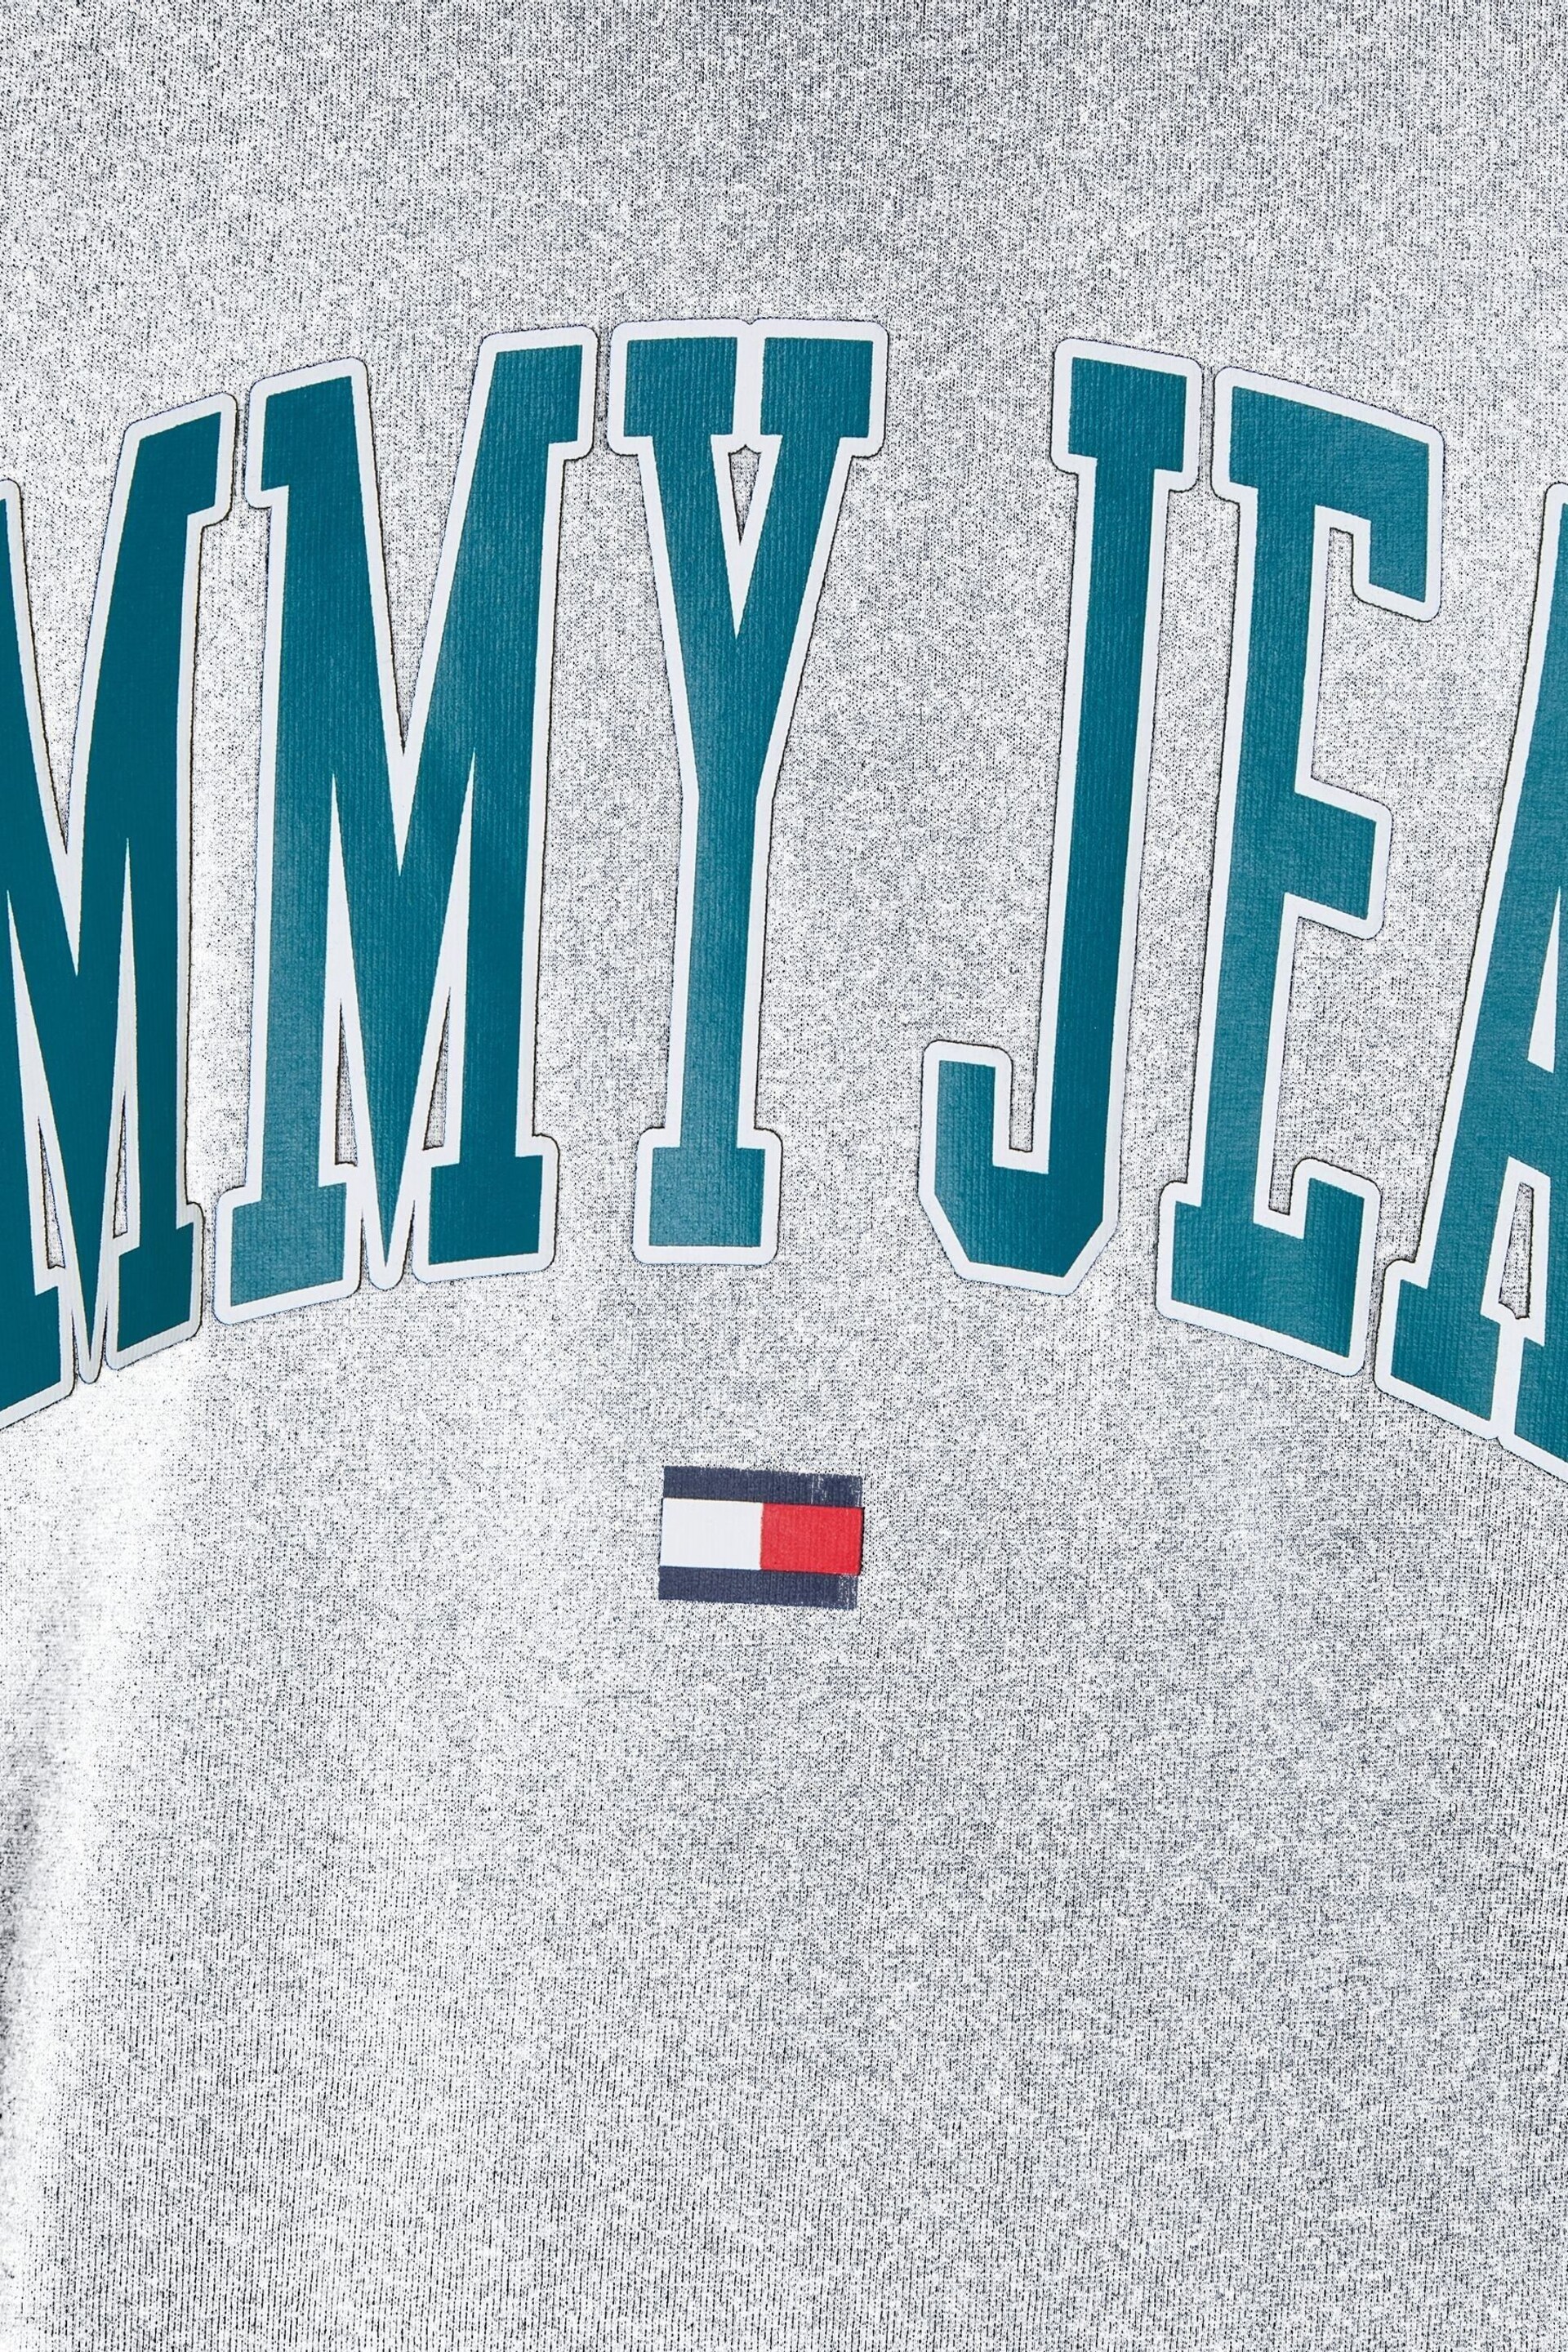 Tommy Jeans Varsity T-Shirt - Image 6 of 6